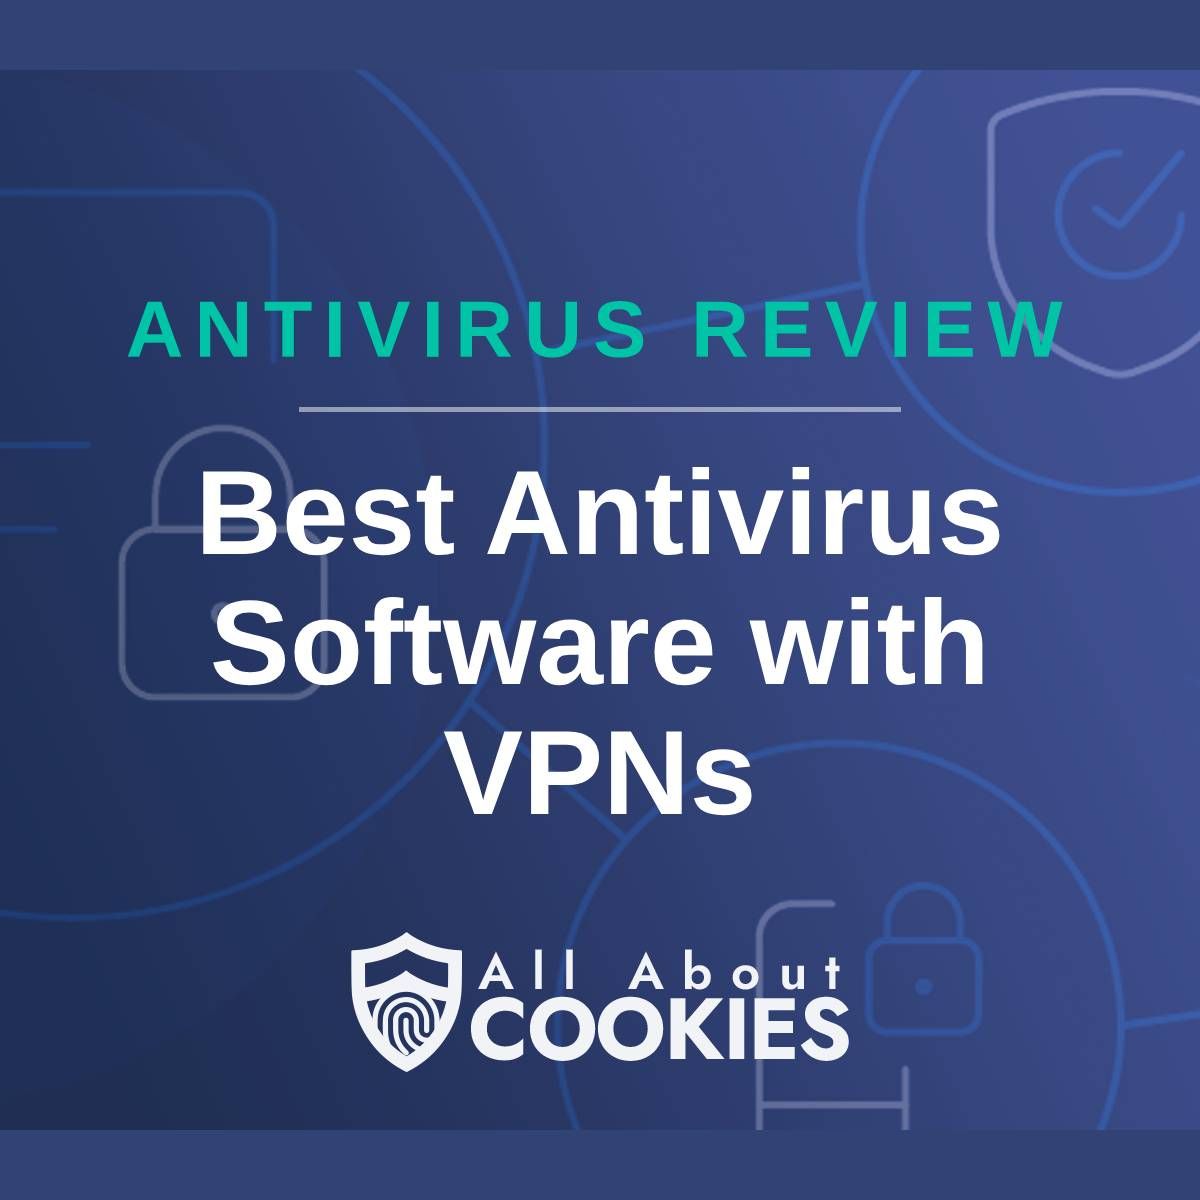 A blue background with images of locks and shields with the text &quot;Best Antivirus Software with VPNs&quot; and the All About Cookies logo. 